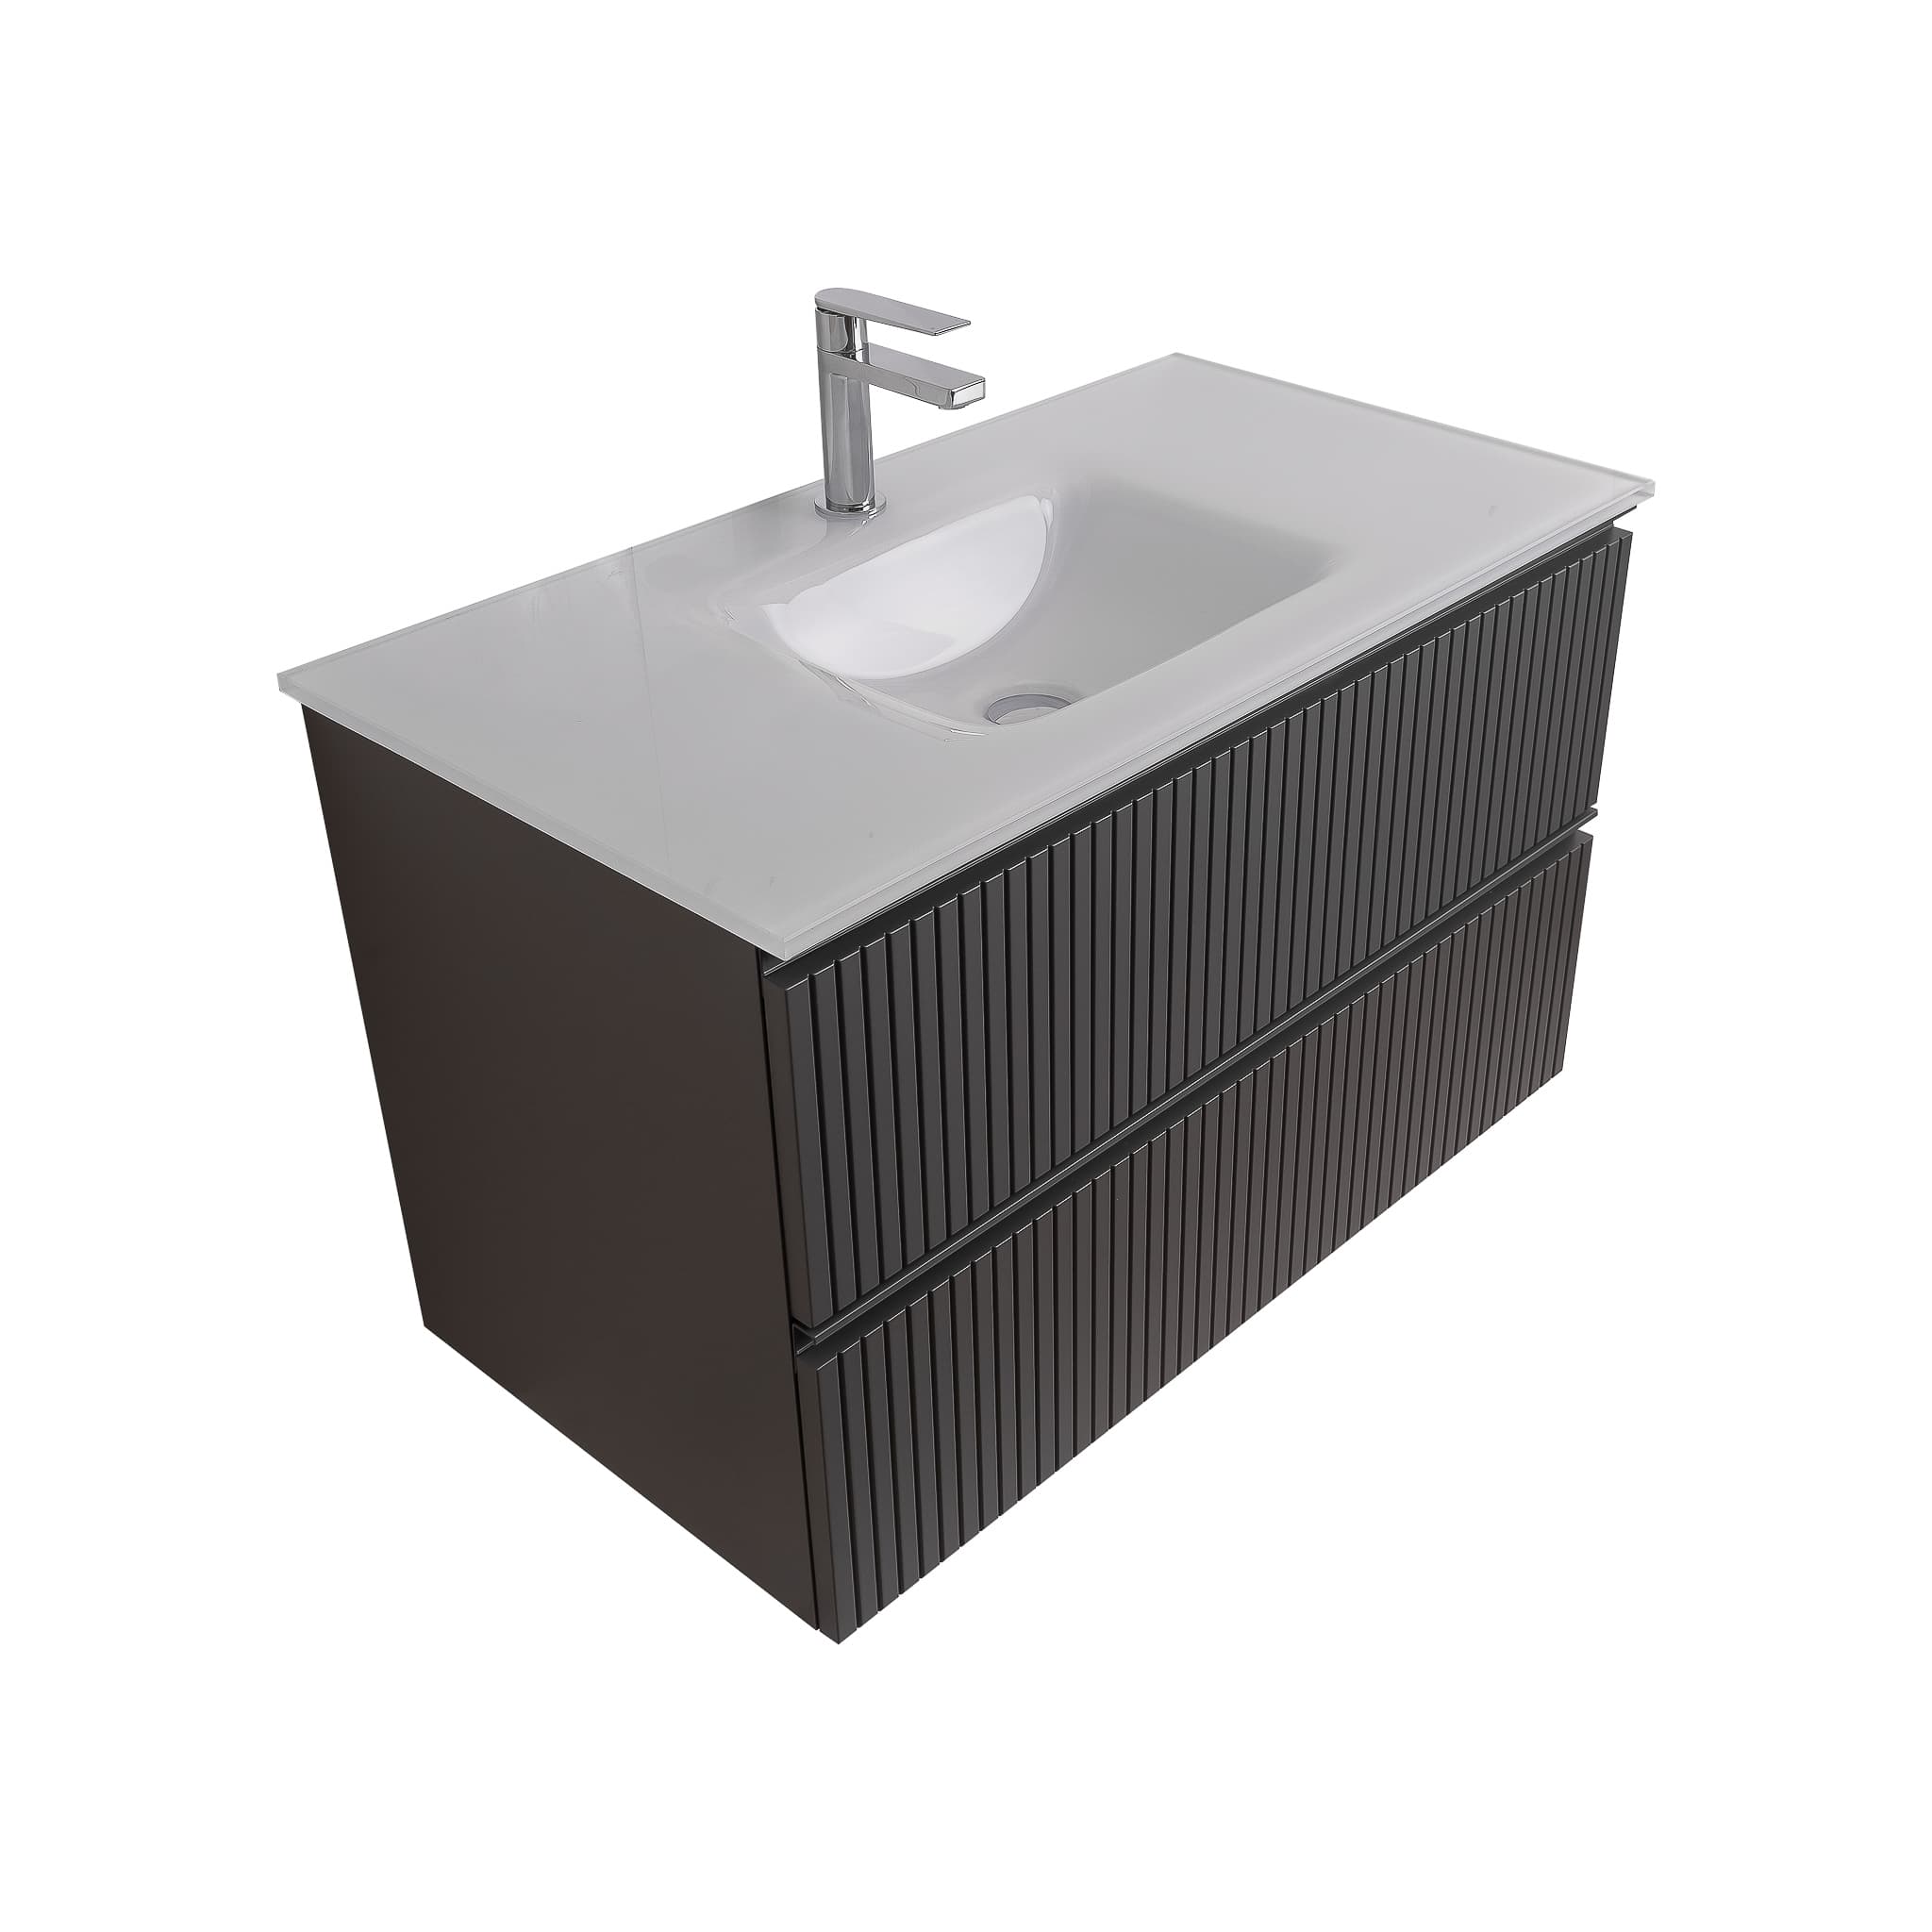 Ares 39.5 Matte Grey Cabinet, White Tempered Glass Sink, Wall Mounted Modern Vanity Set